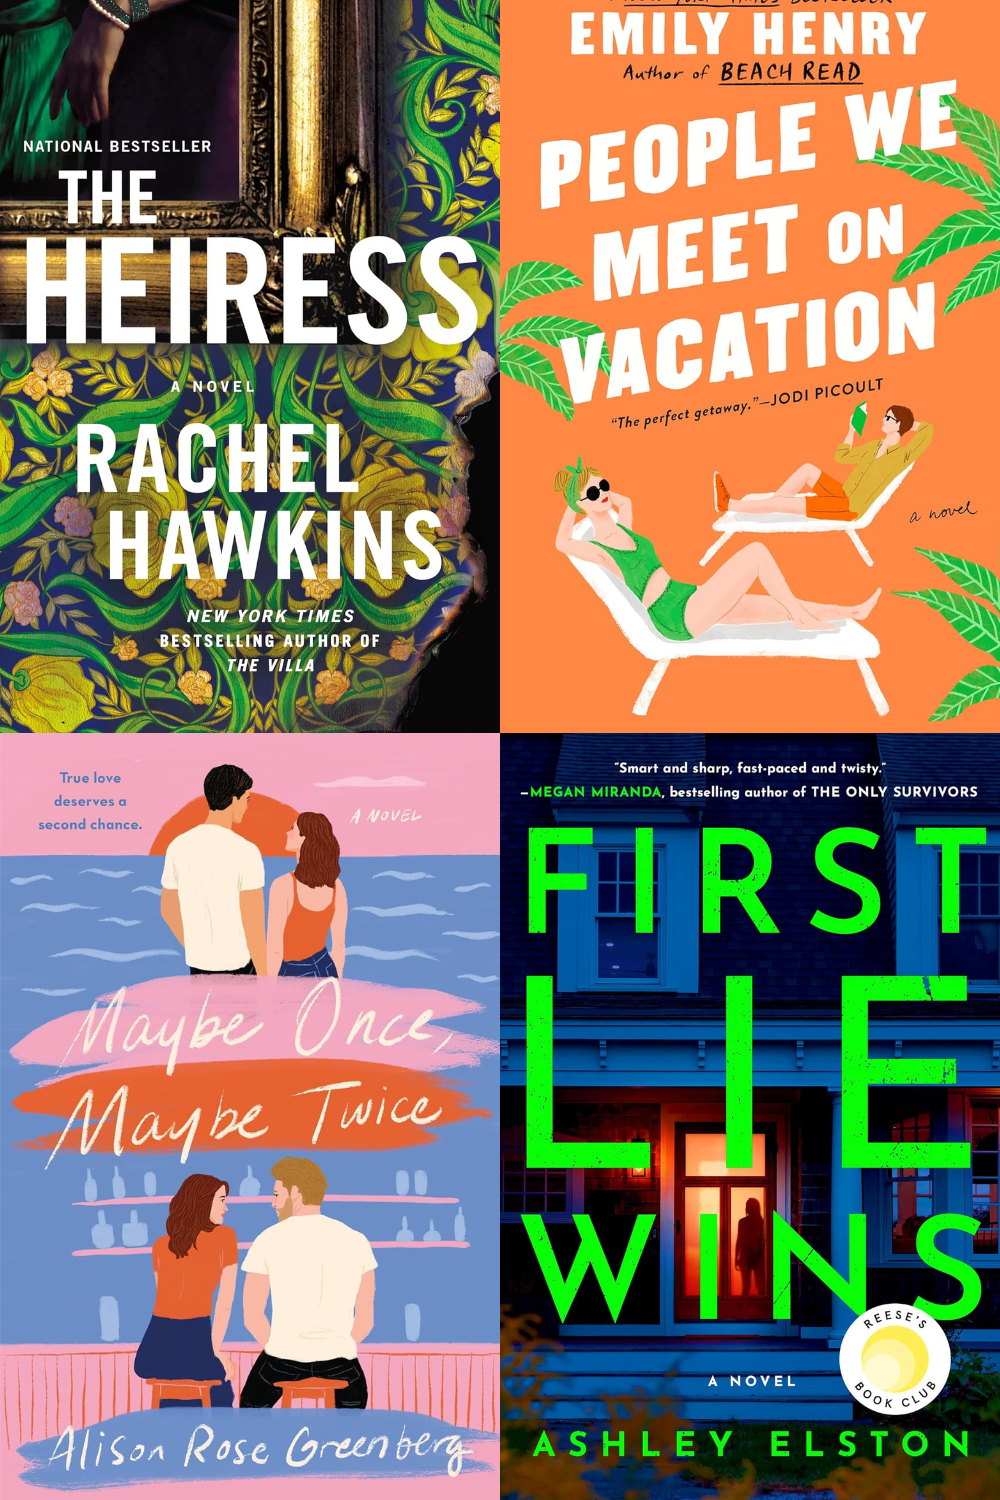 Sandy Pages: The Best Beach Reads for Your Beach Trip